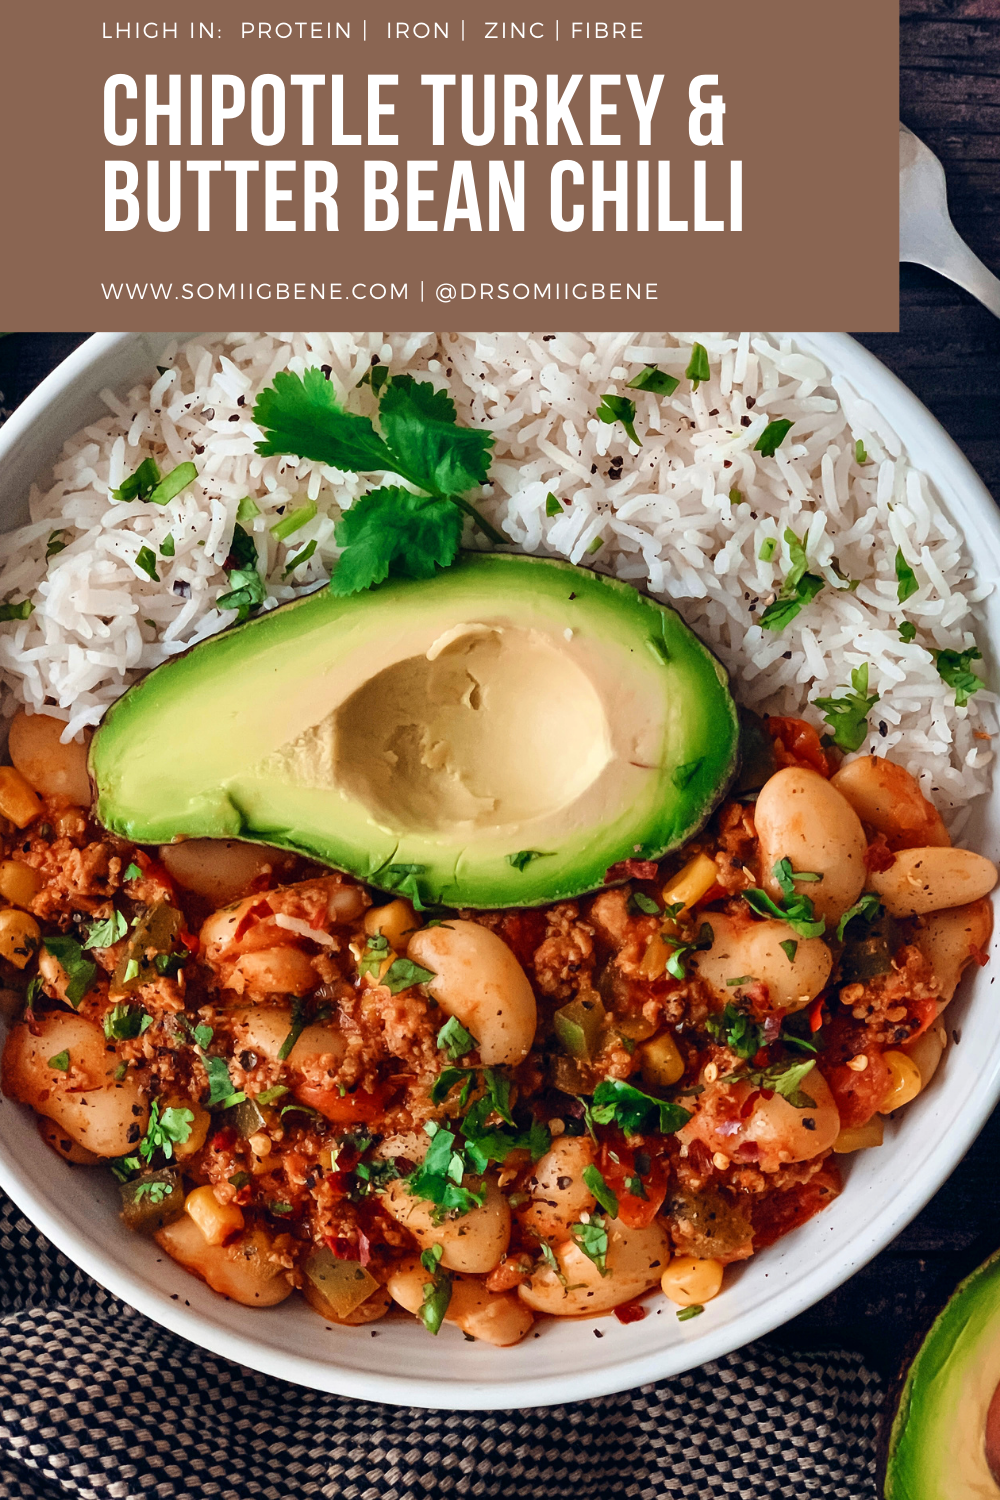 Chipotle Turkey and Butter Bean Chilli